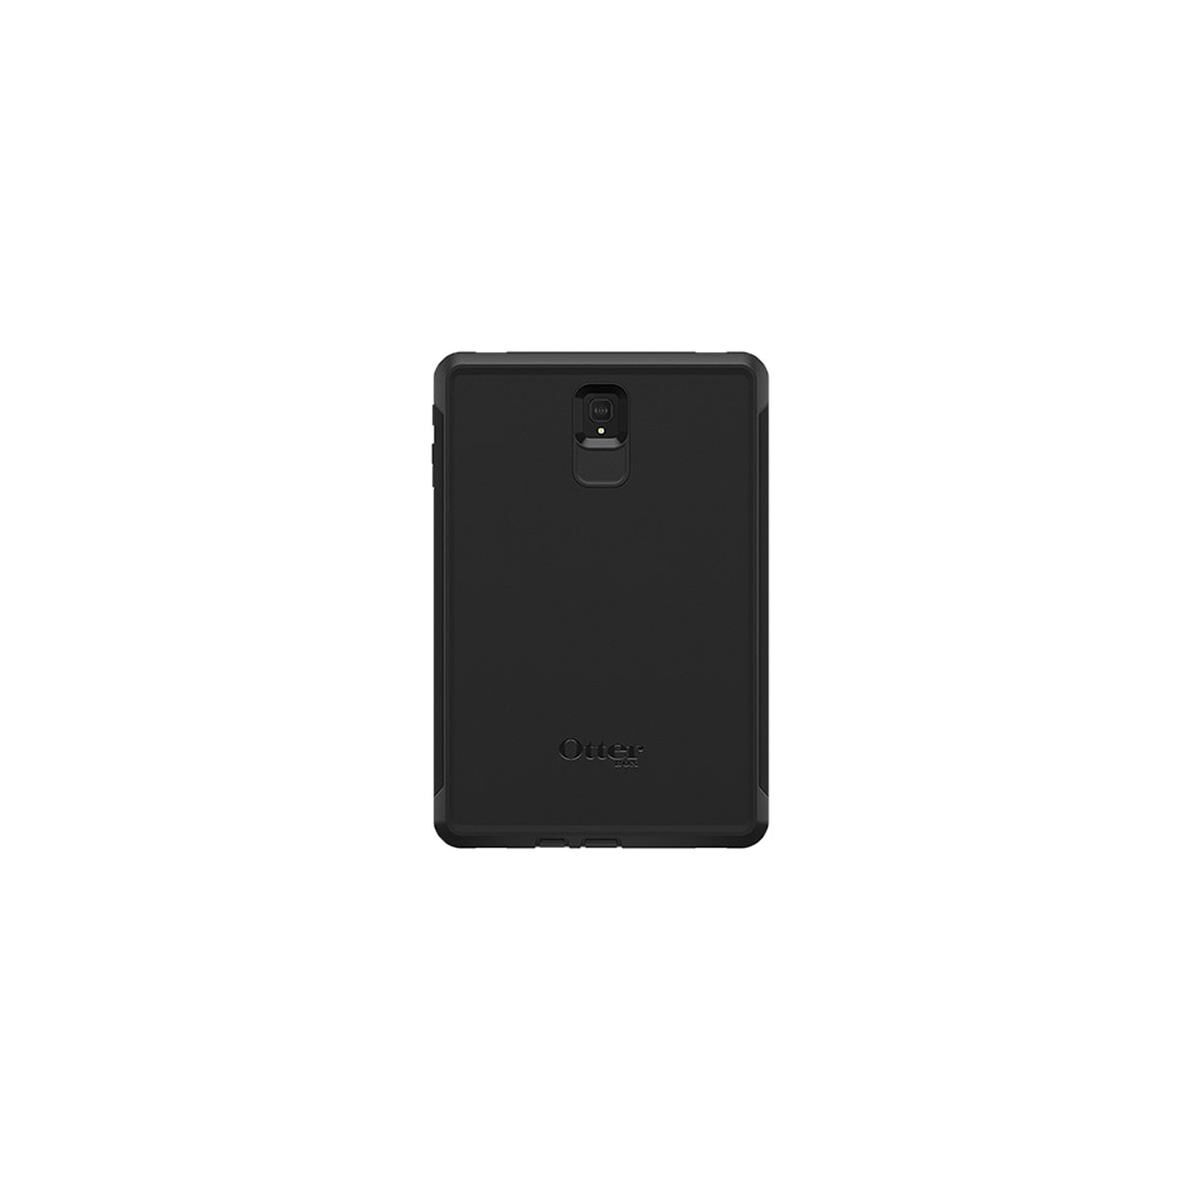 OtterBox Defender Series Case for Galaxy Tab S4, Black